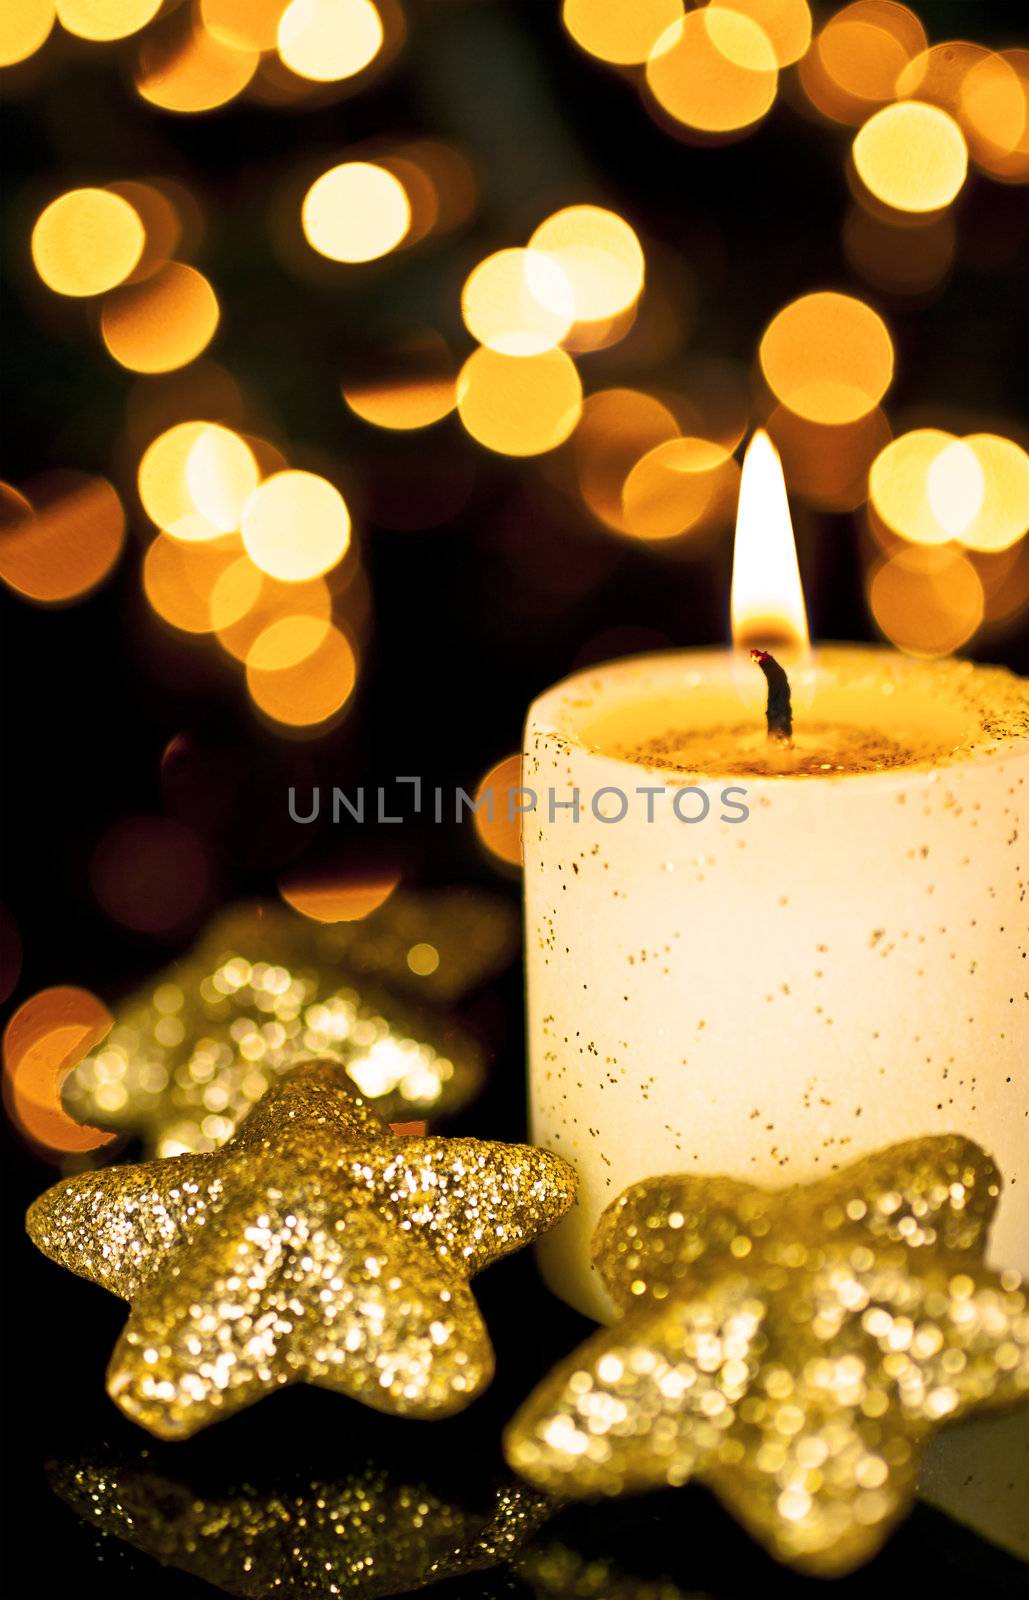 Candle with a star on a black background, back background Bokeh lights.